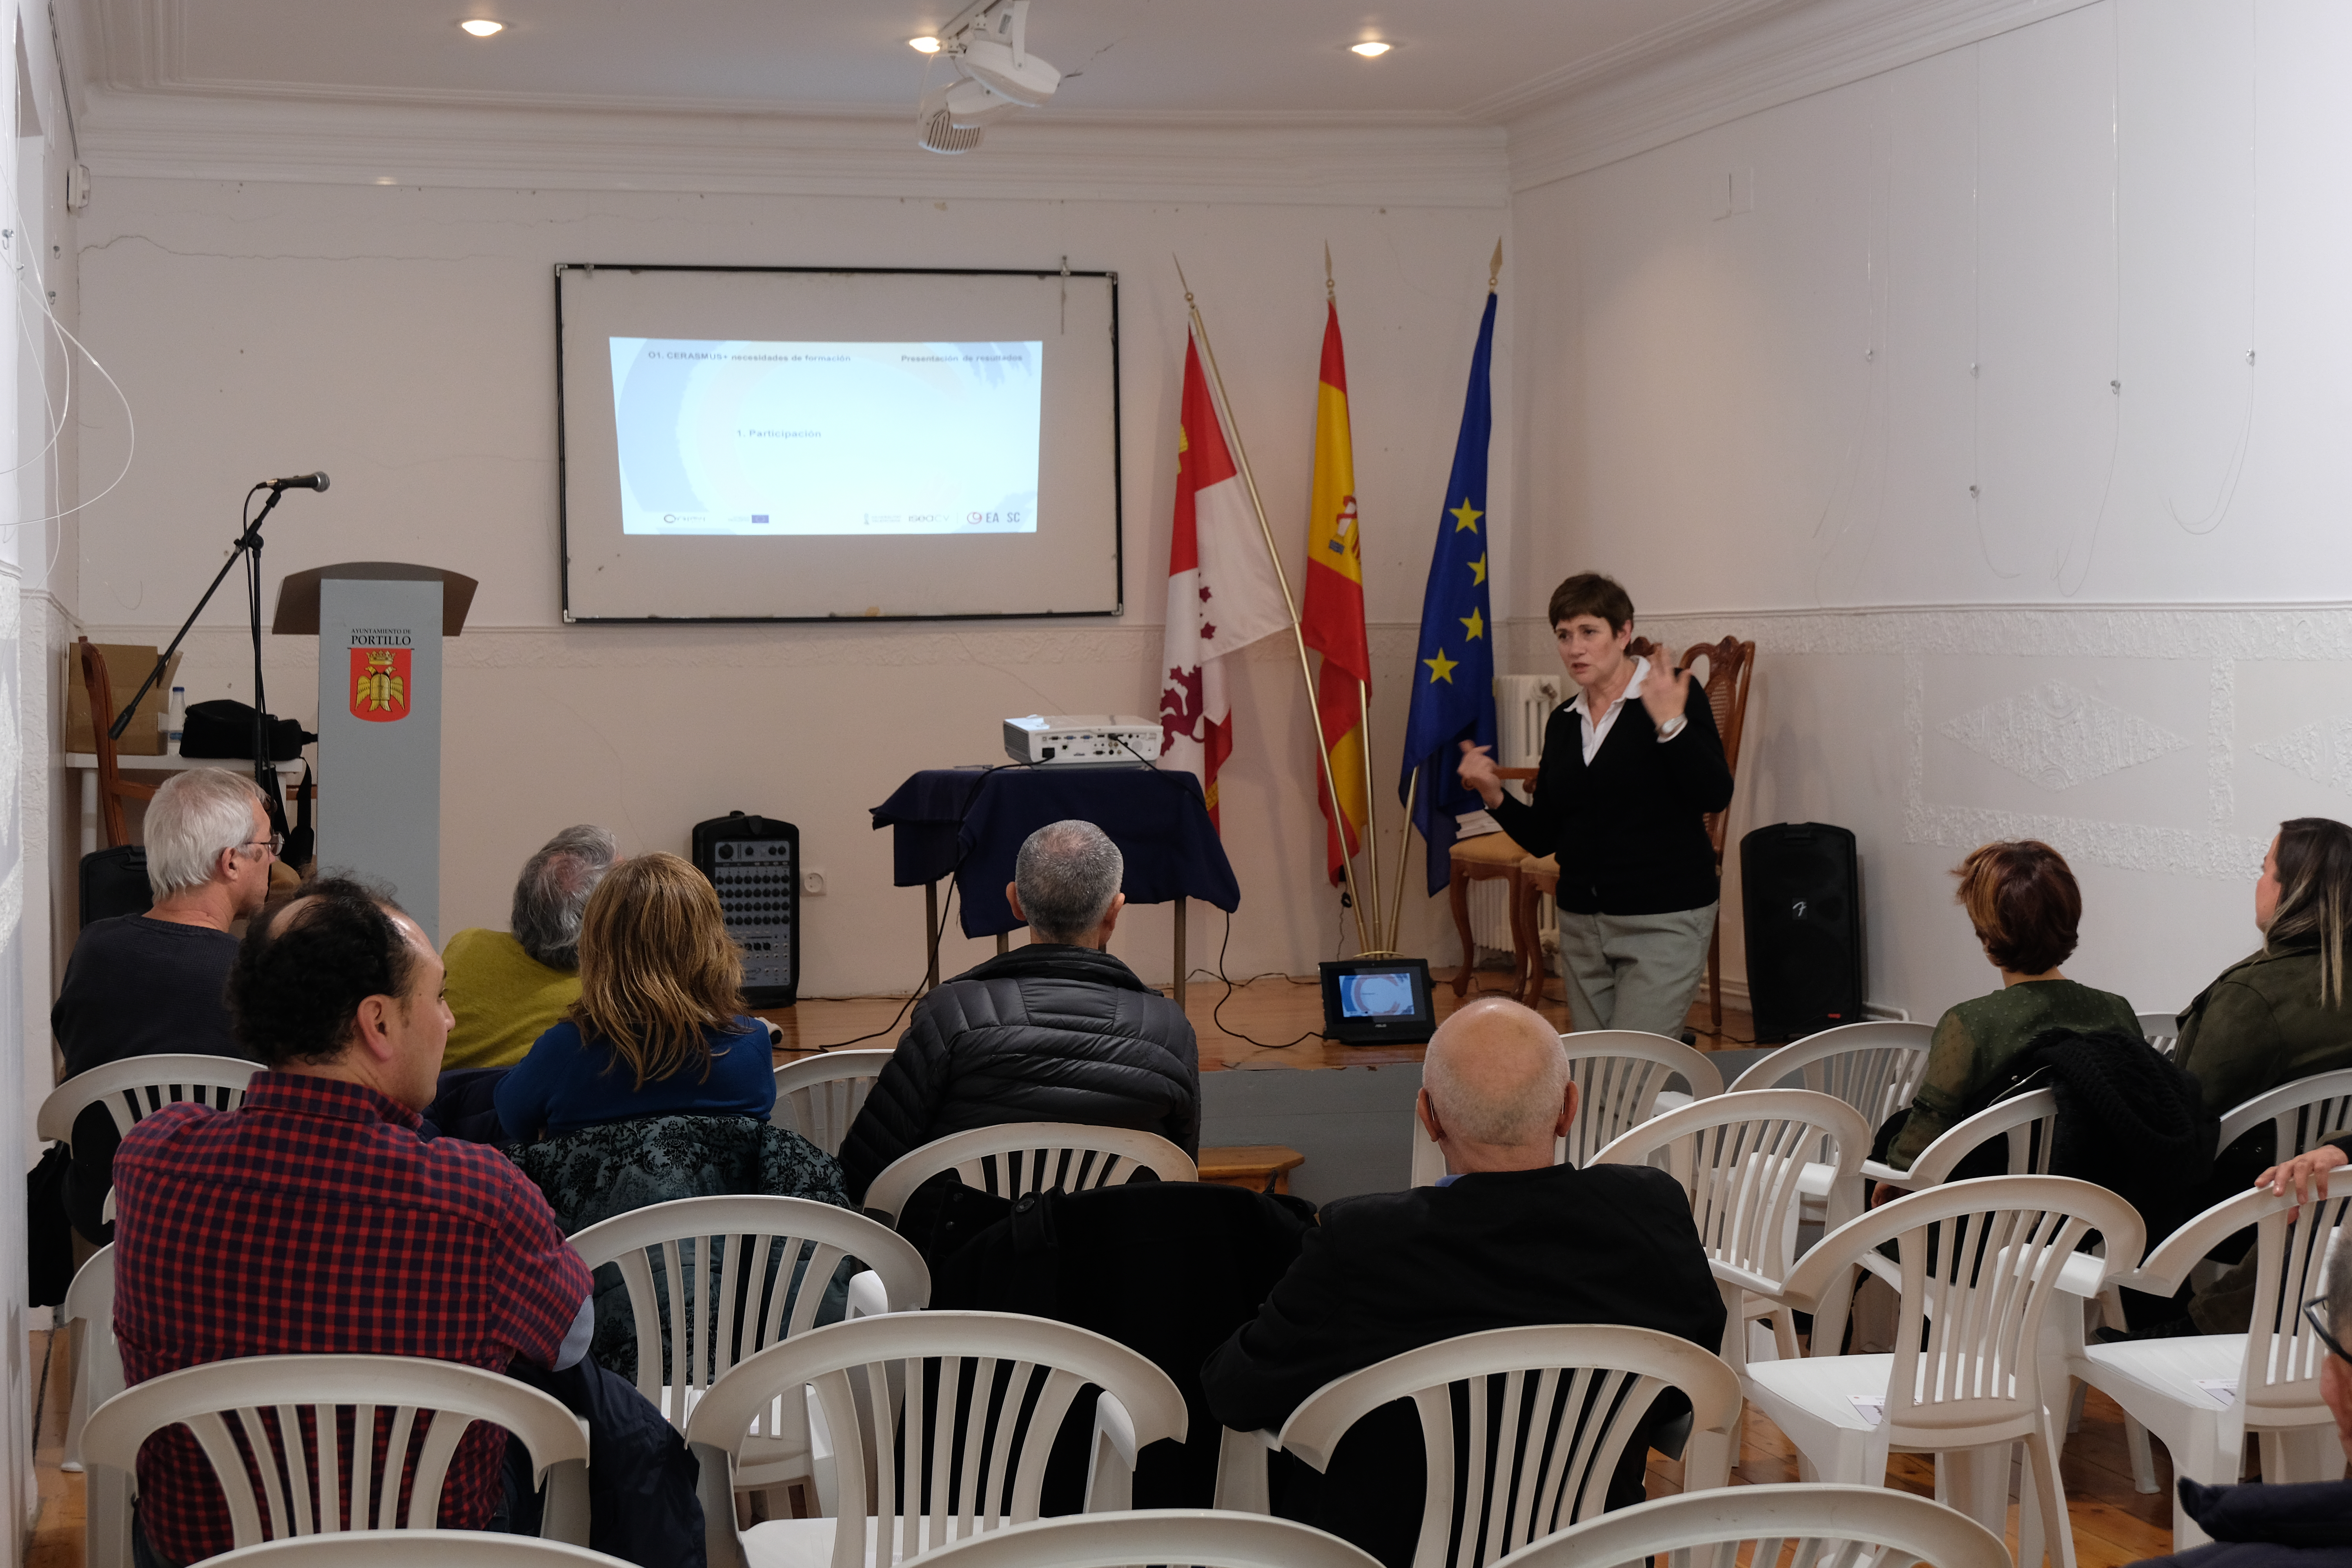 Presentation of the survey on the training needs in Valladolid